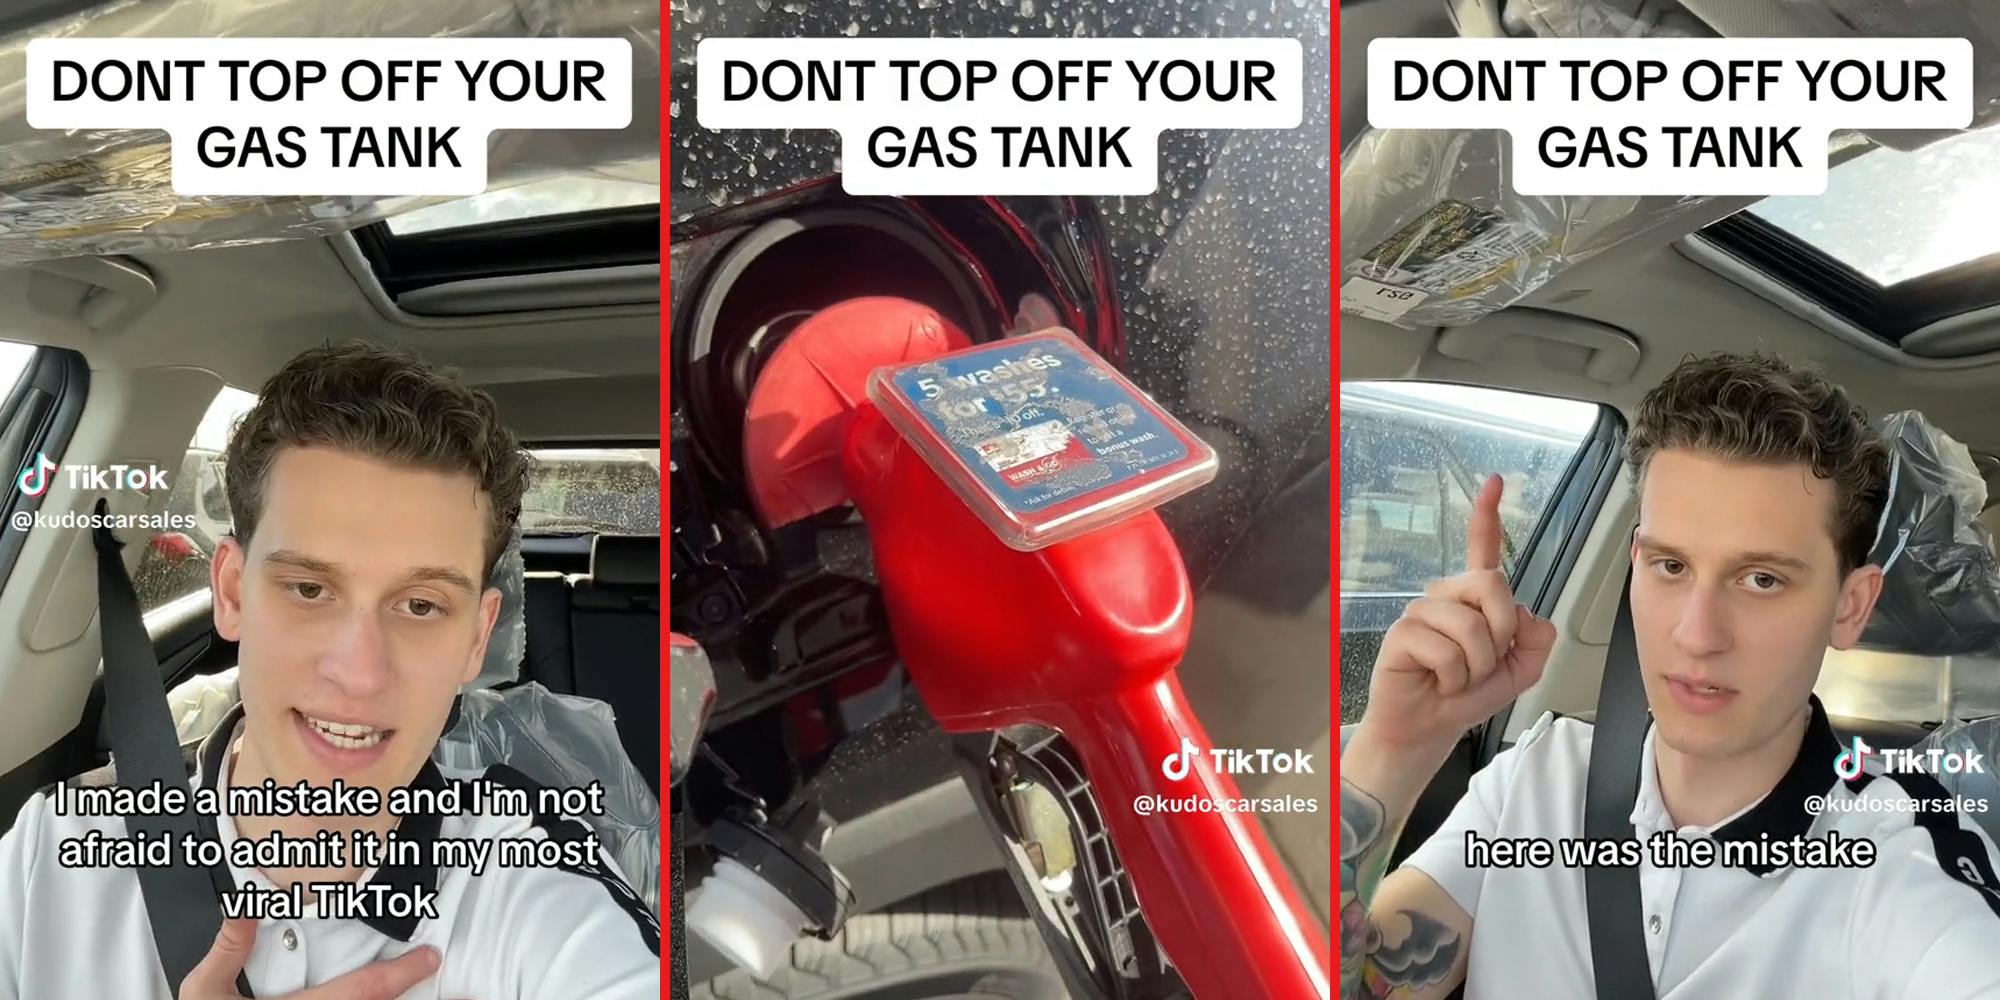 ‘I’m 42 and didn’t know’: Toyota car salesman issues warning to people who ‘top off’ their gas tank